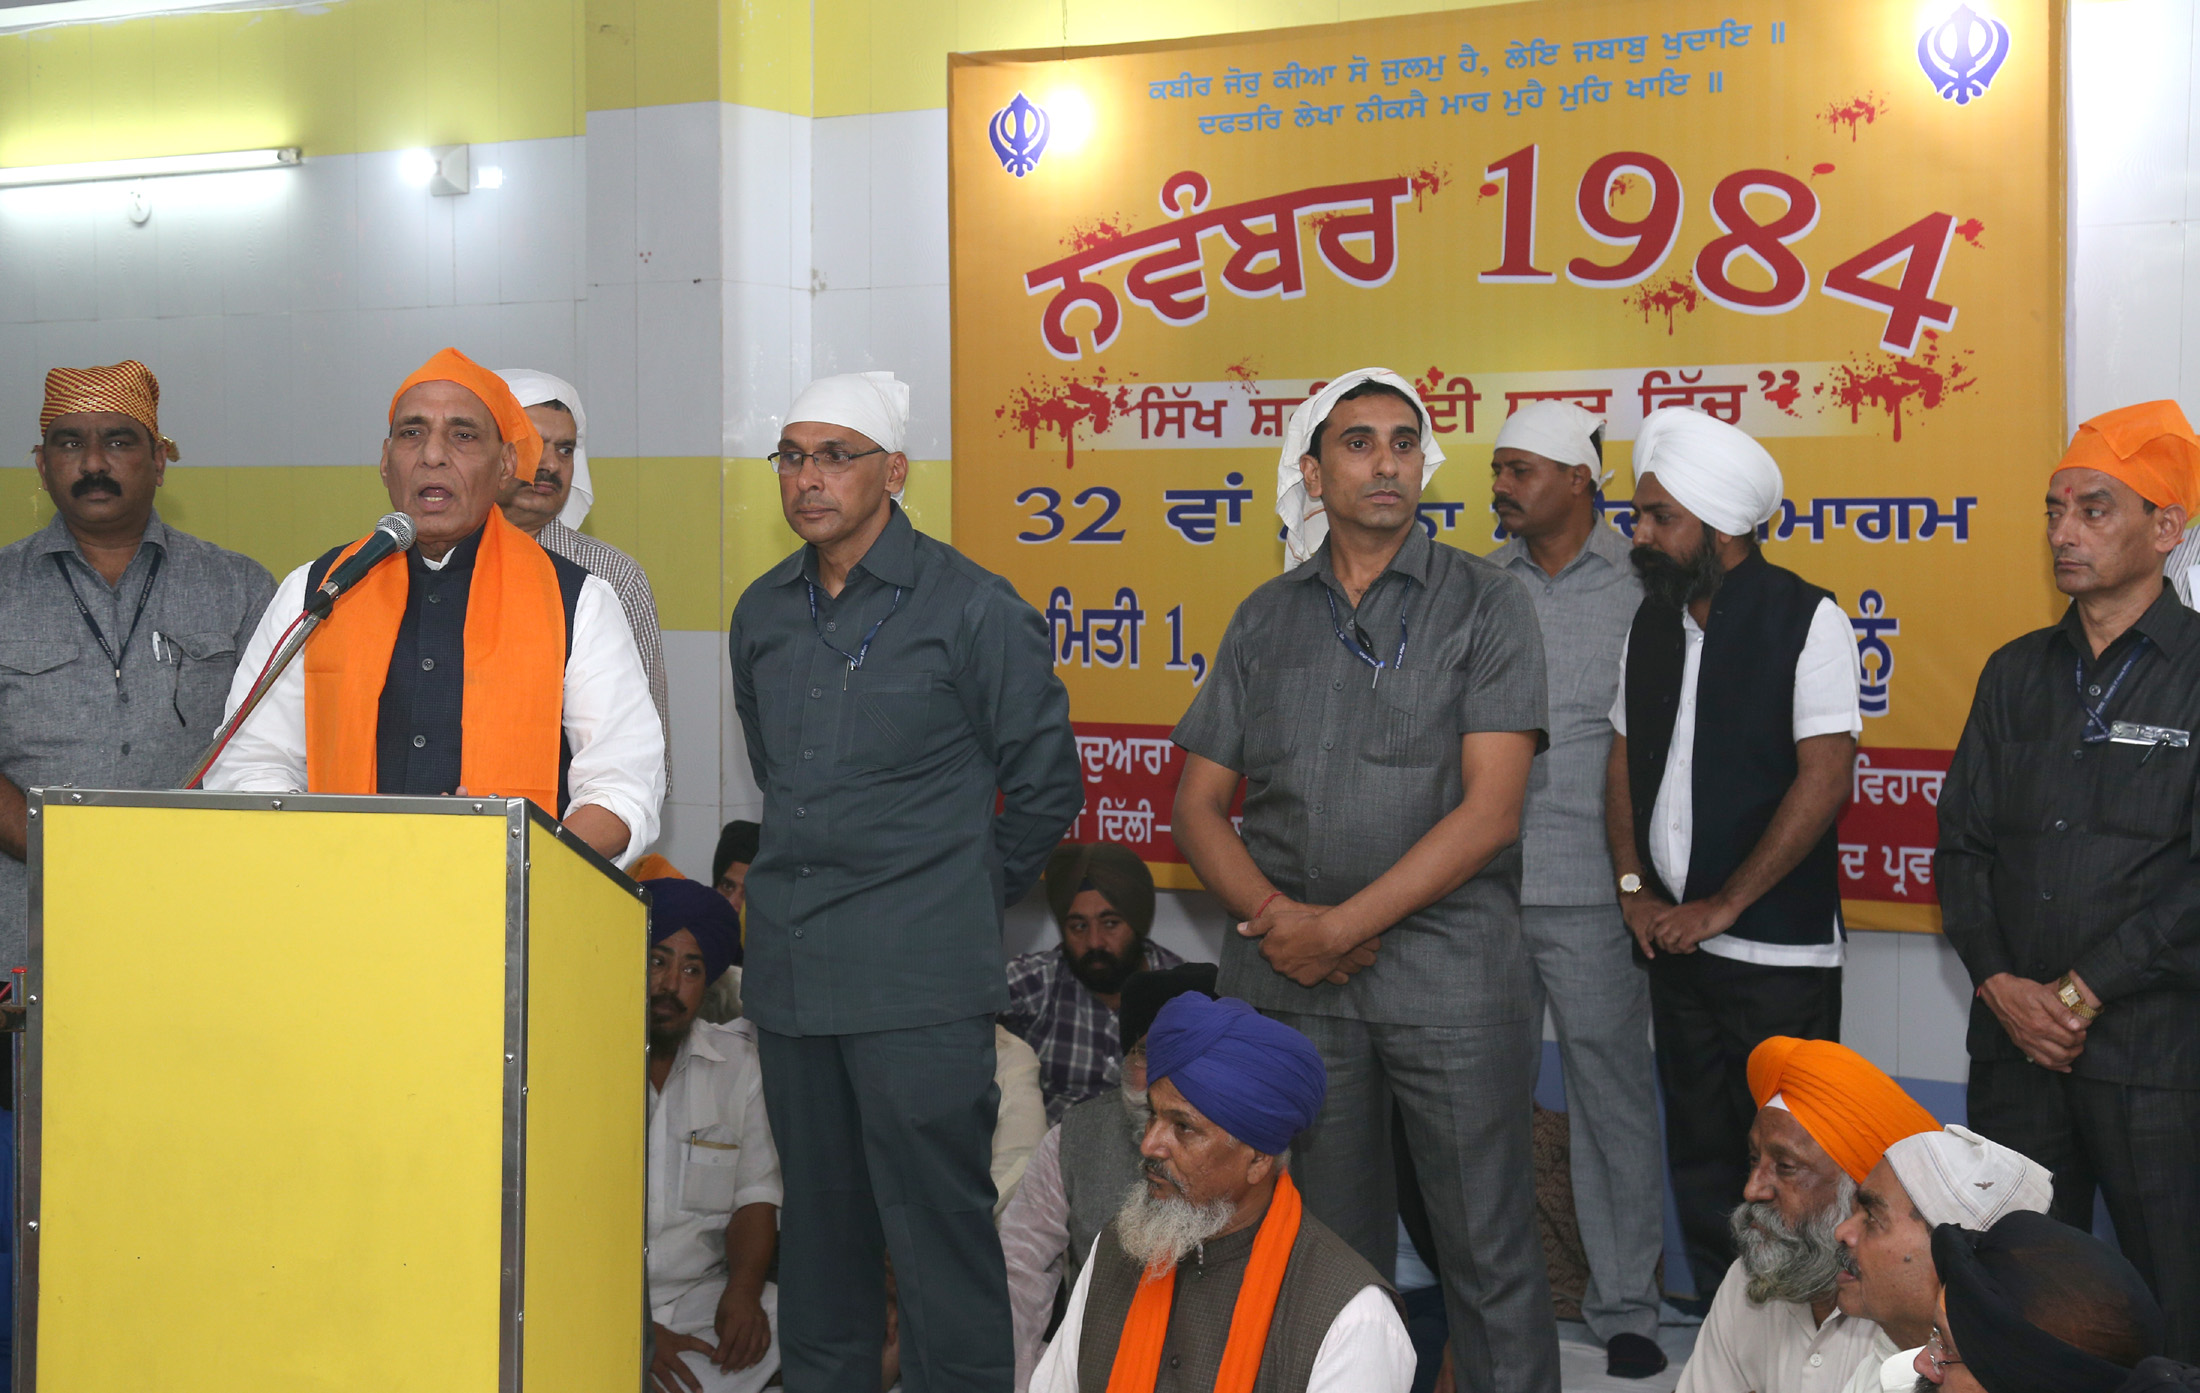 The Union Home Minister, Shri Rajnath Singh addressing the gathering, at a programme to mark the anniversary of the 1984 Sikh riot victims, in New Delhi on November 02, 2016.